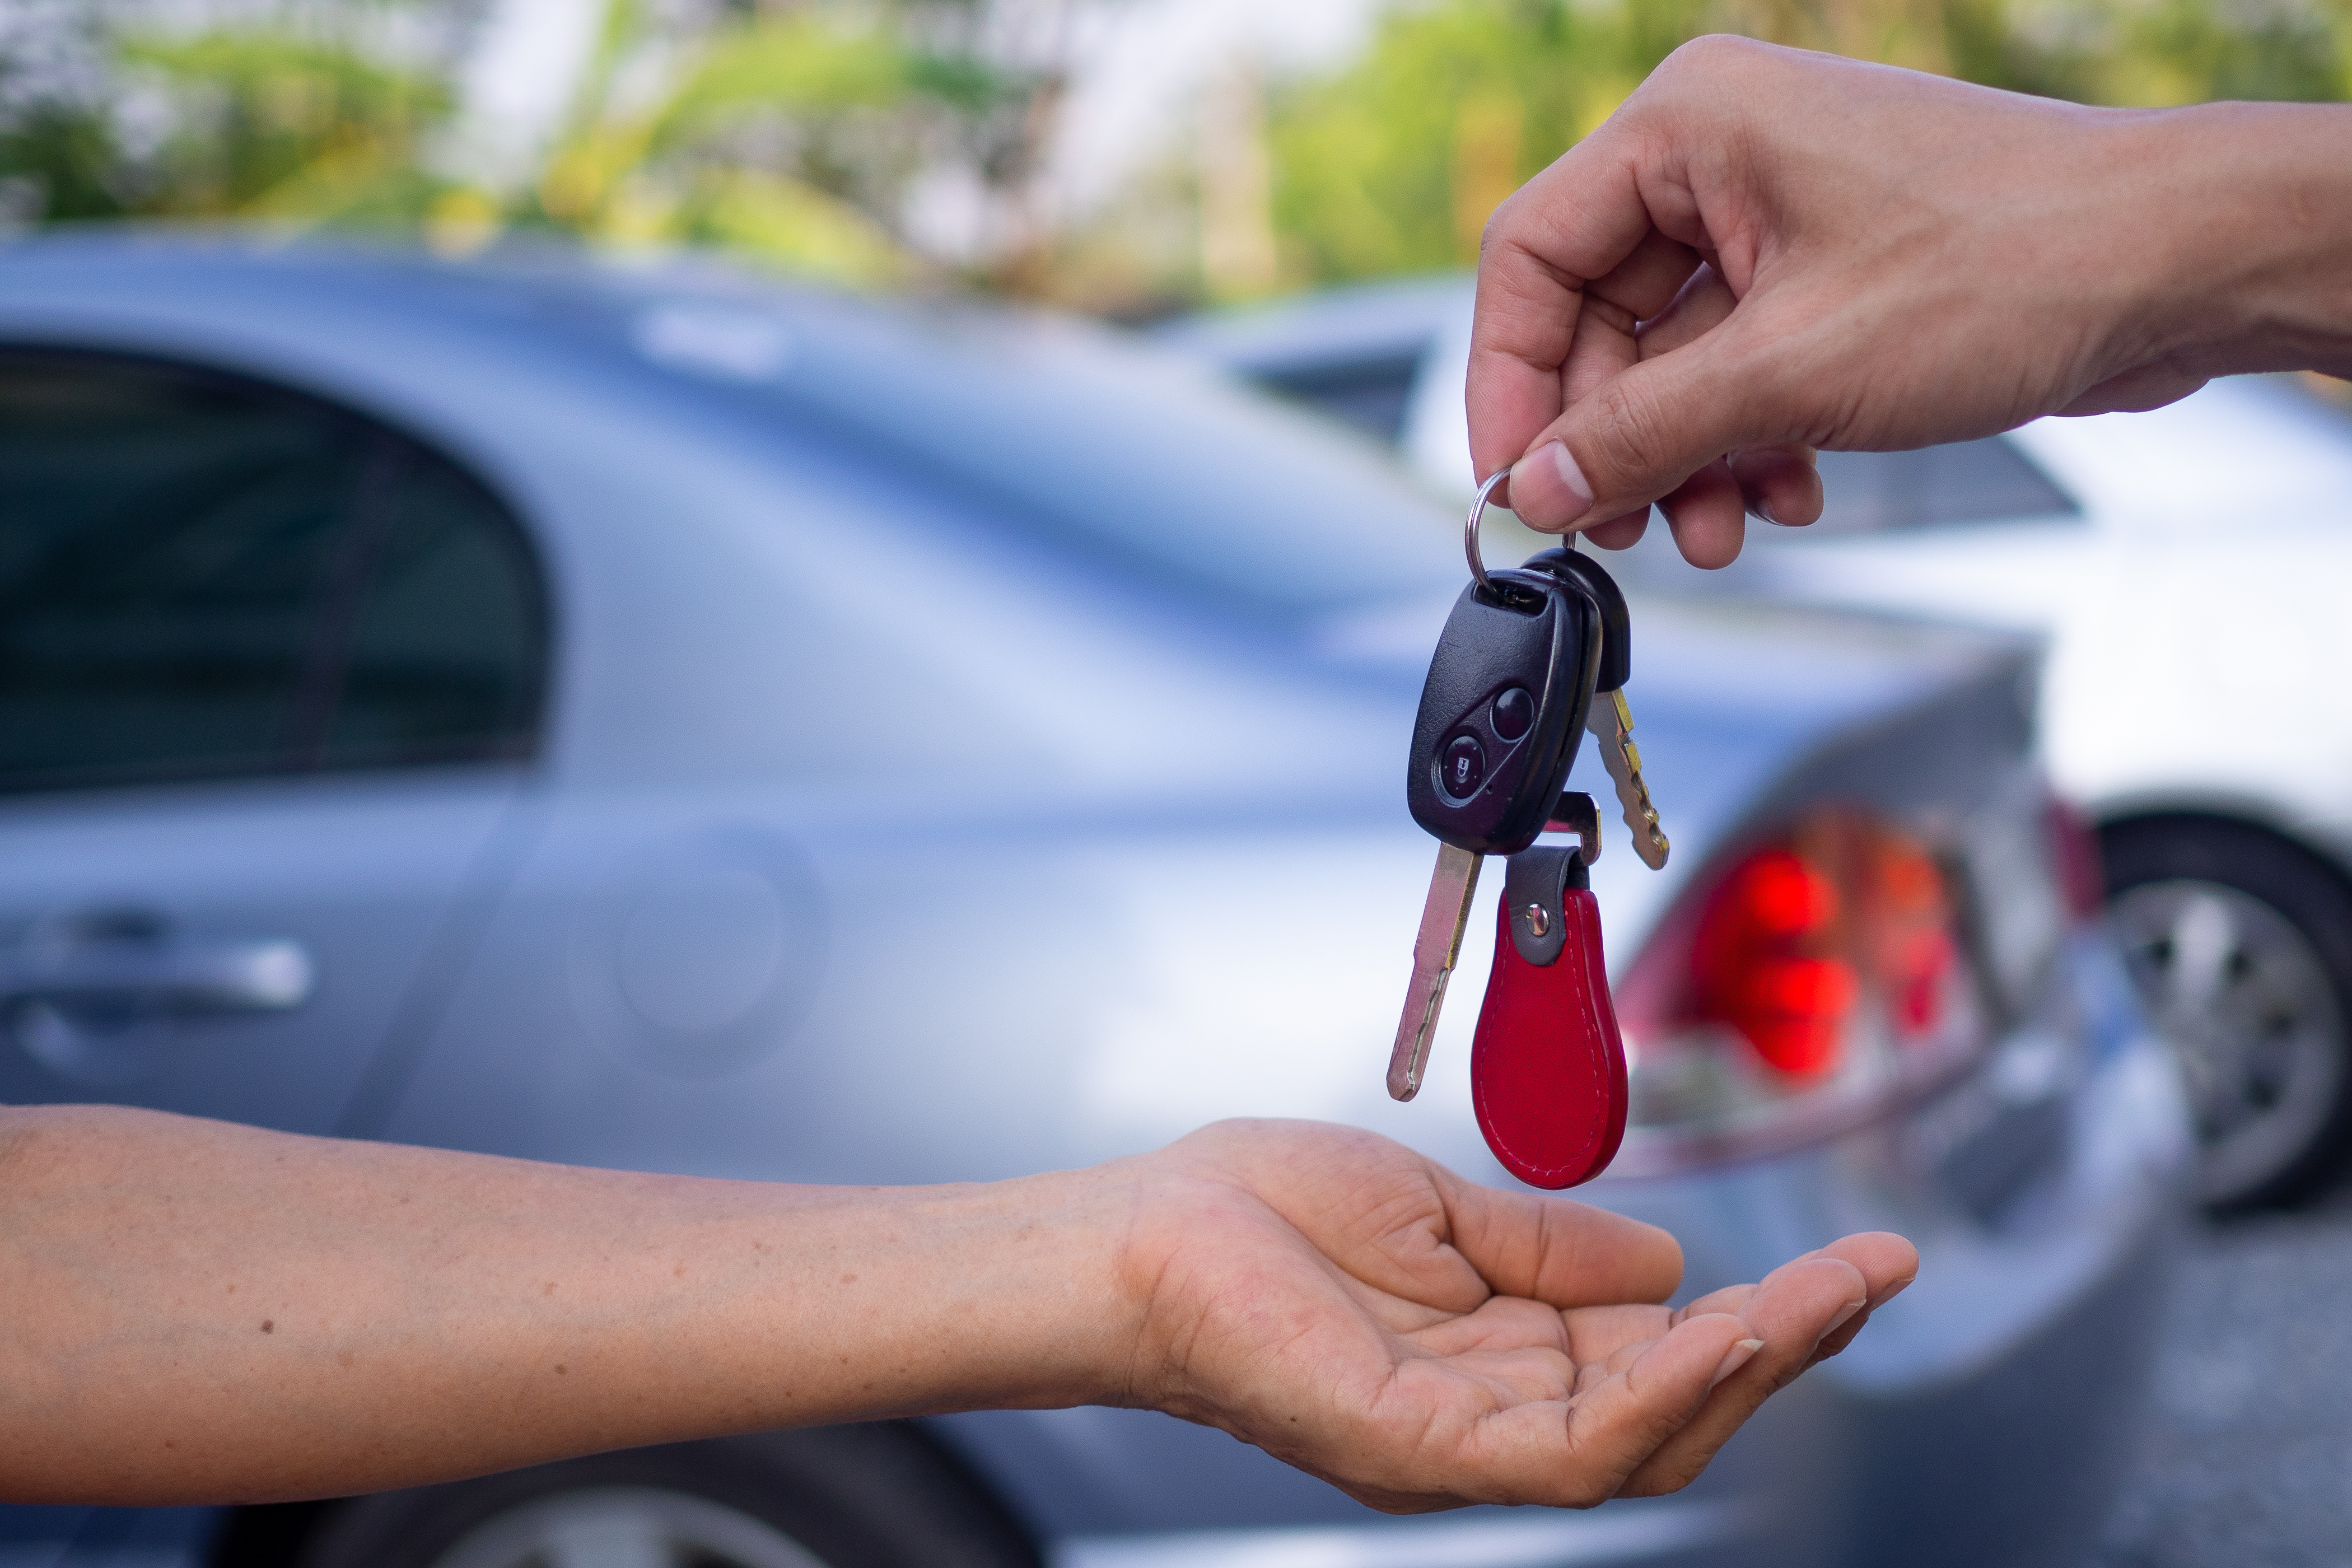 What Should I Do After Buying a Vehicle?